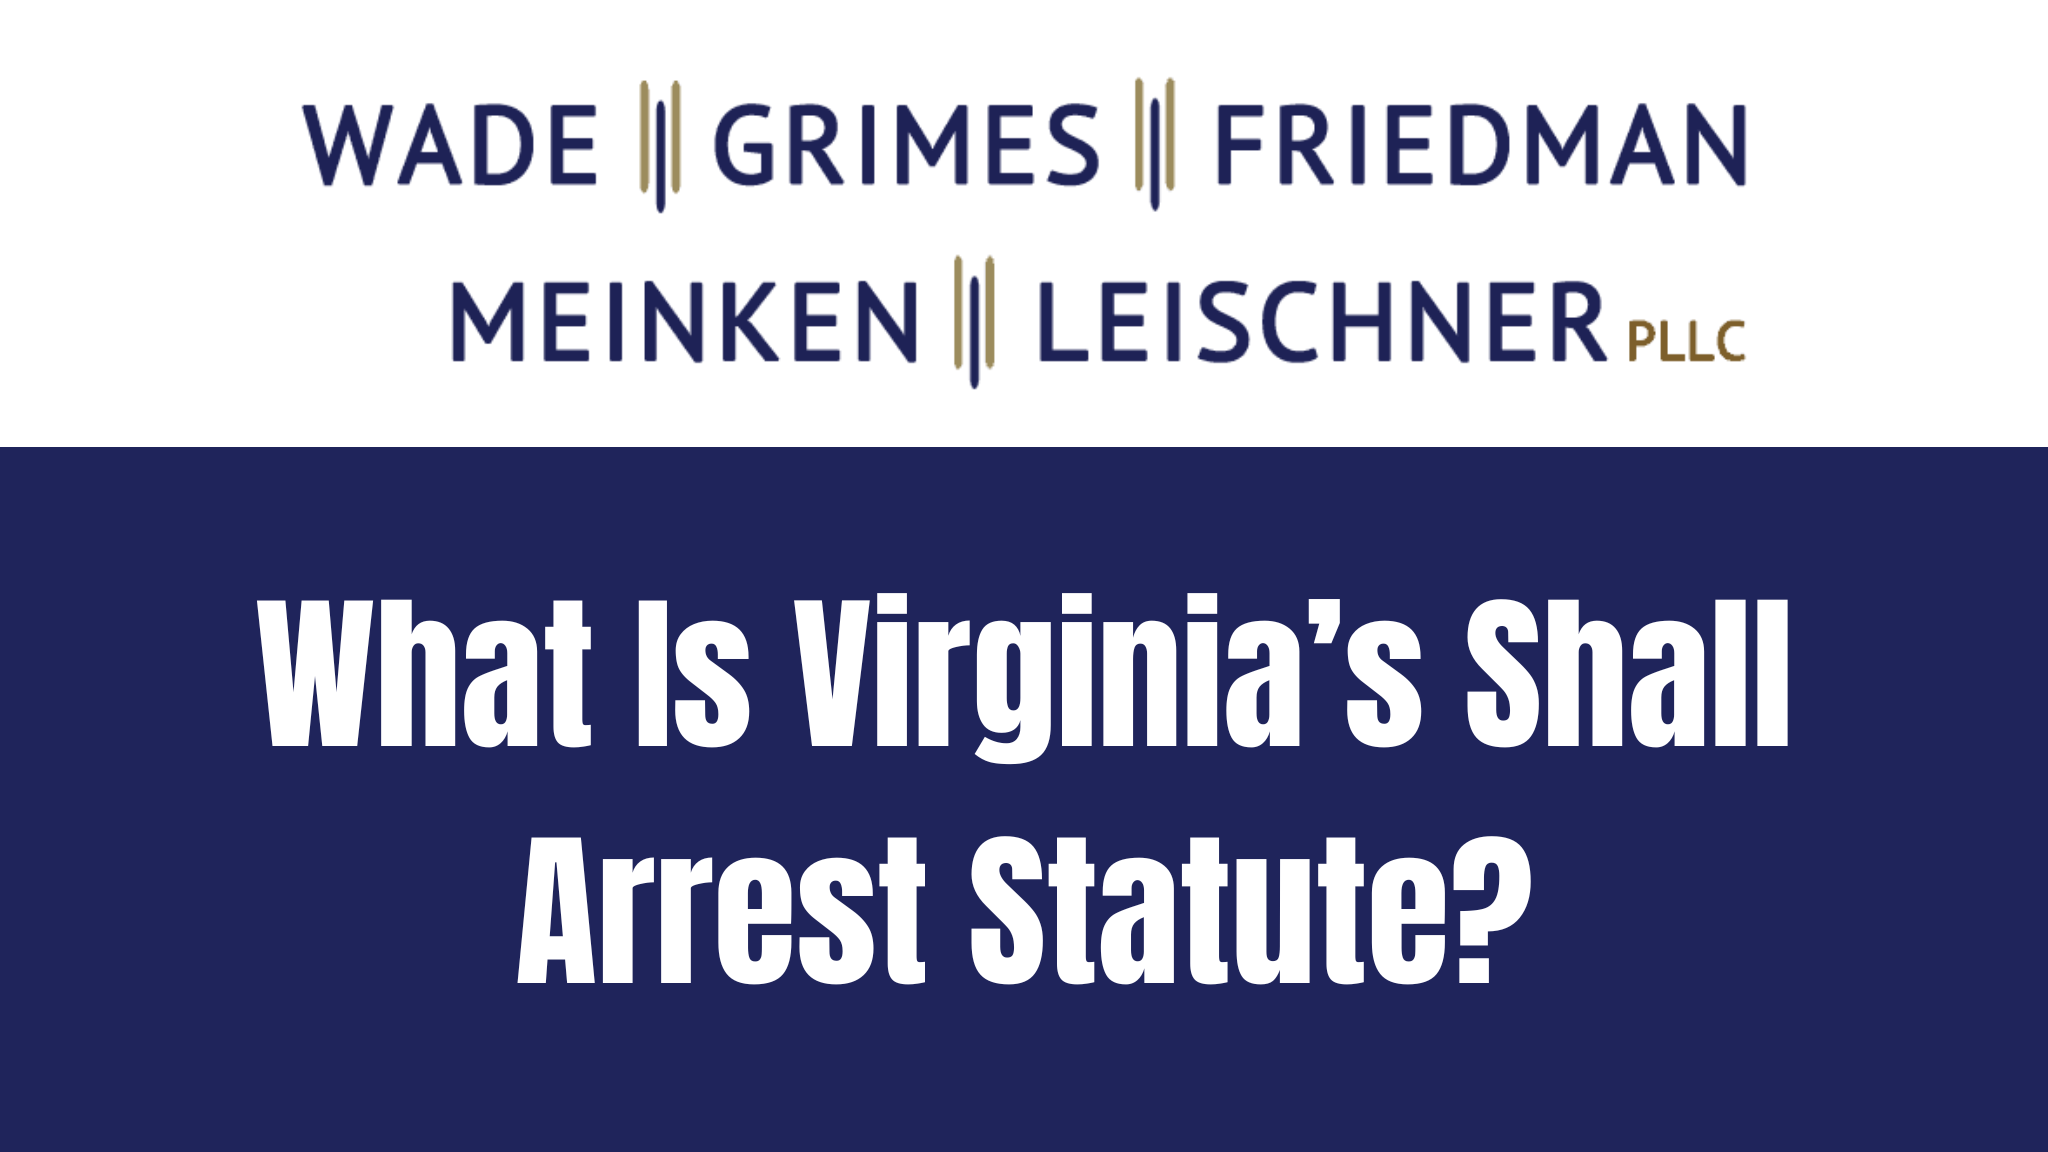 What Is Virginia’s Shall Arrest Statute?